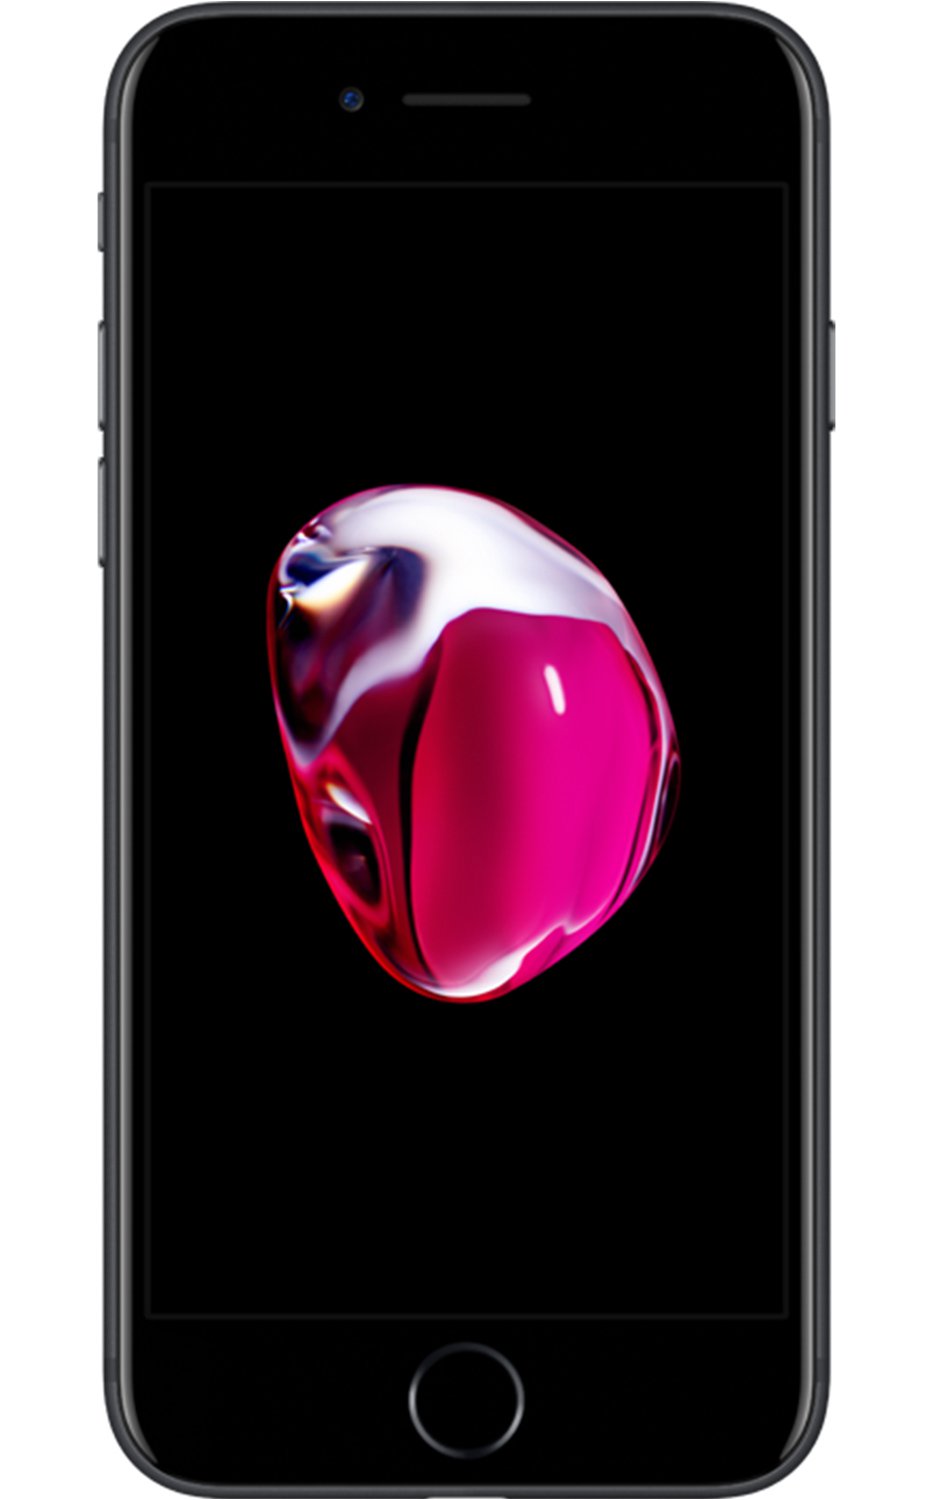 How much does the iphone 7 cost at t mobile Apple Iphone 7 128gb Matte Black Verizon T Mobile At T Unlocked Smartphone Ebay